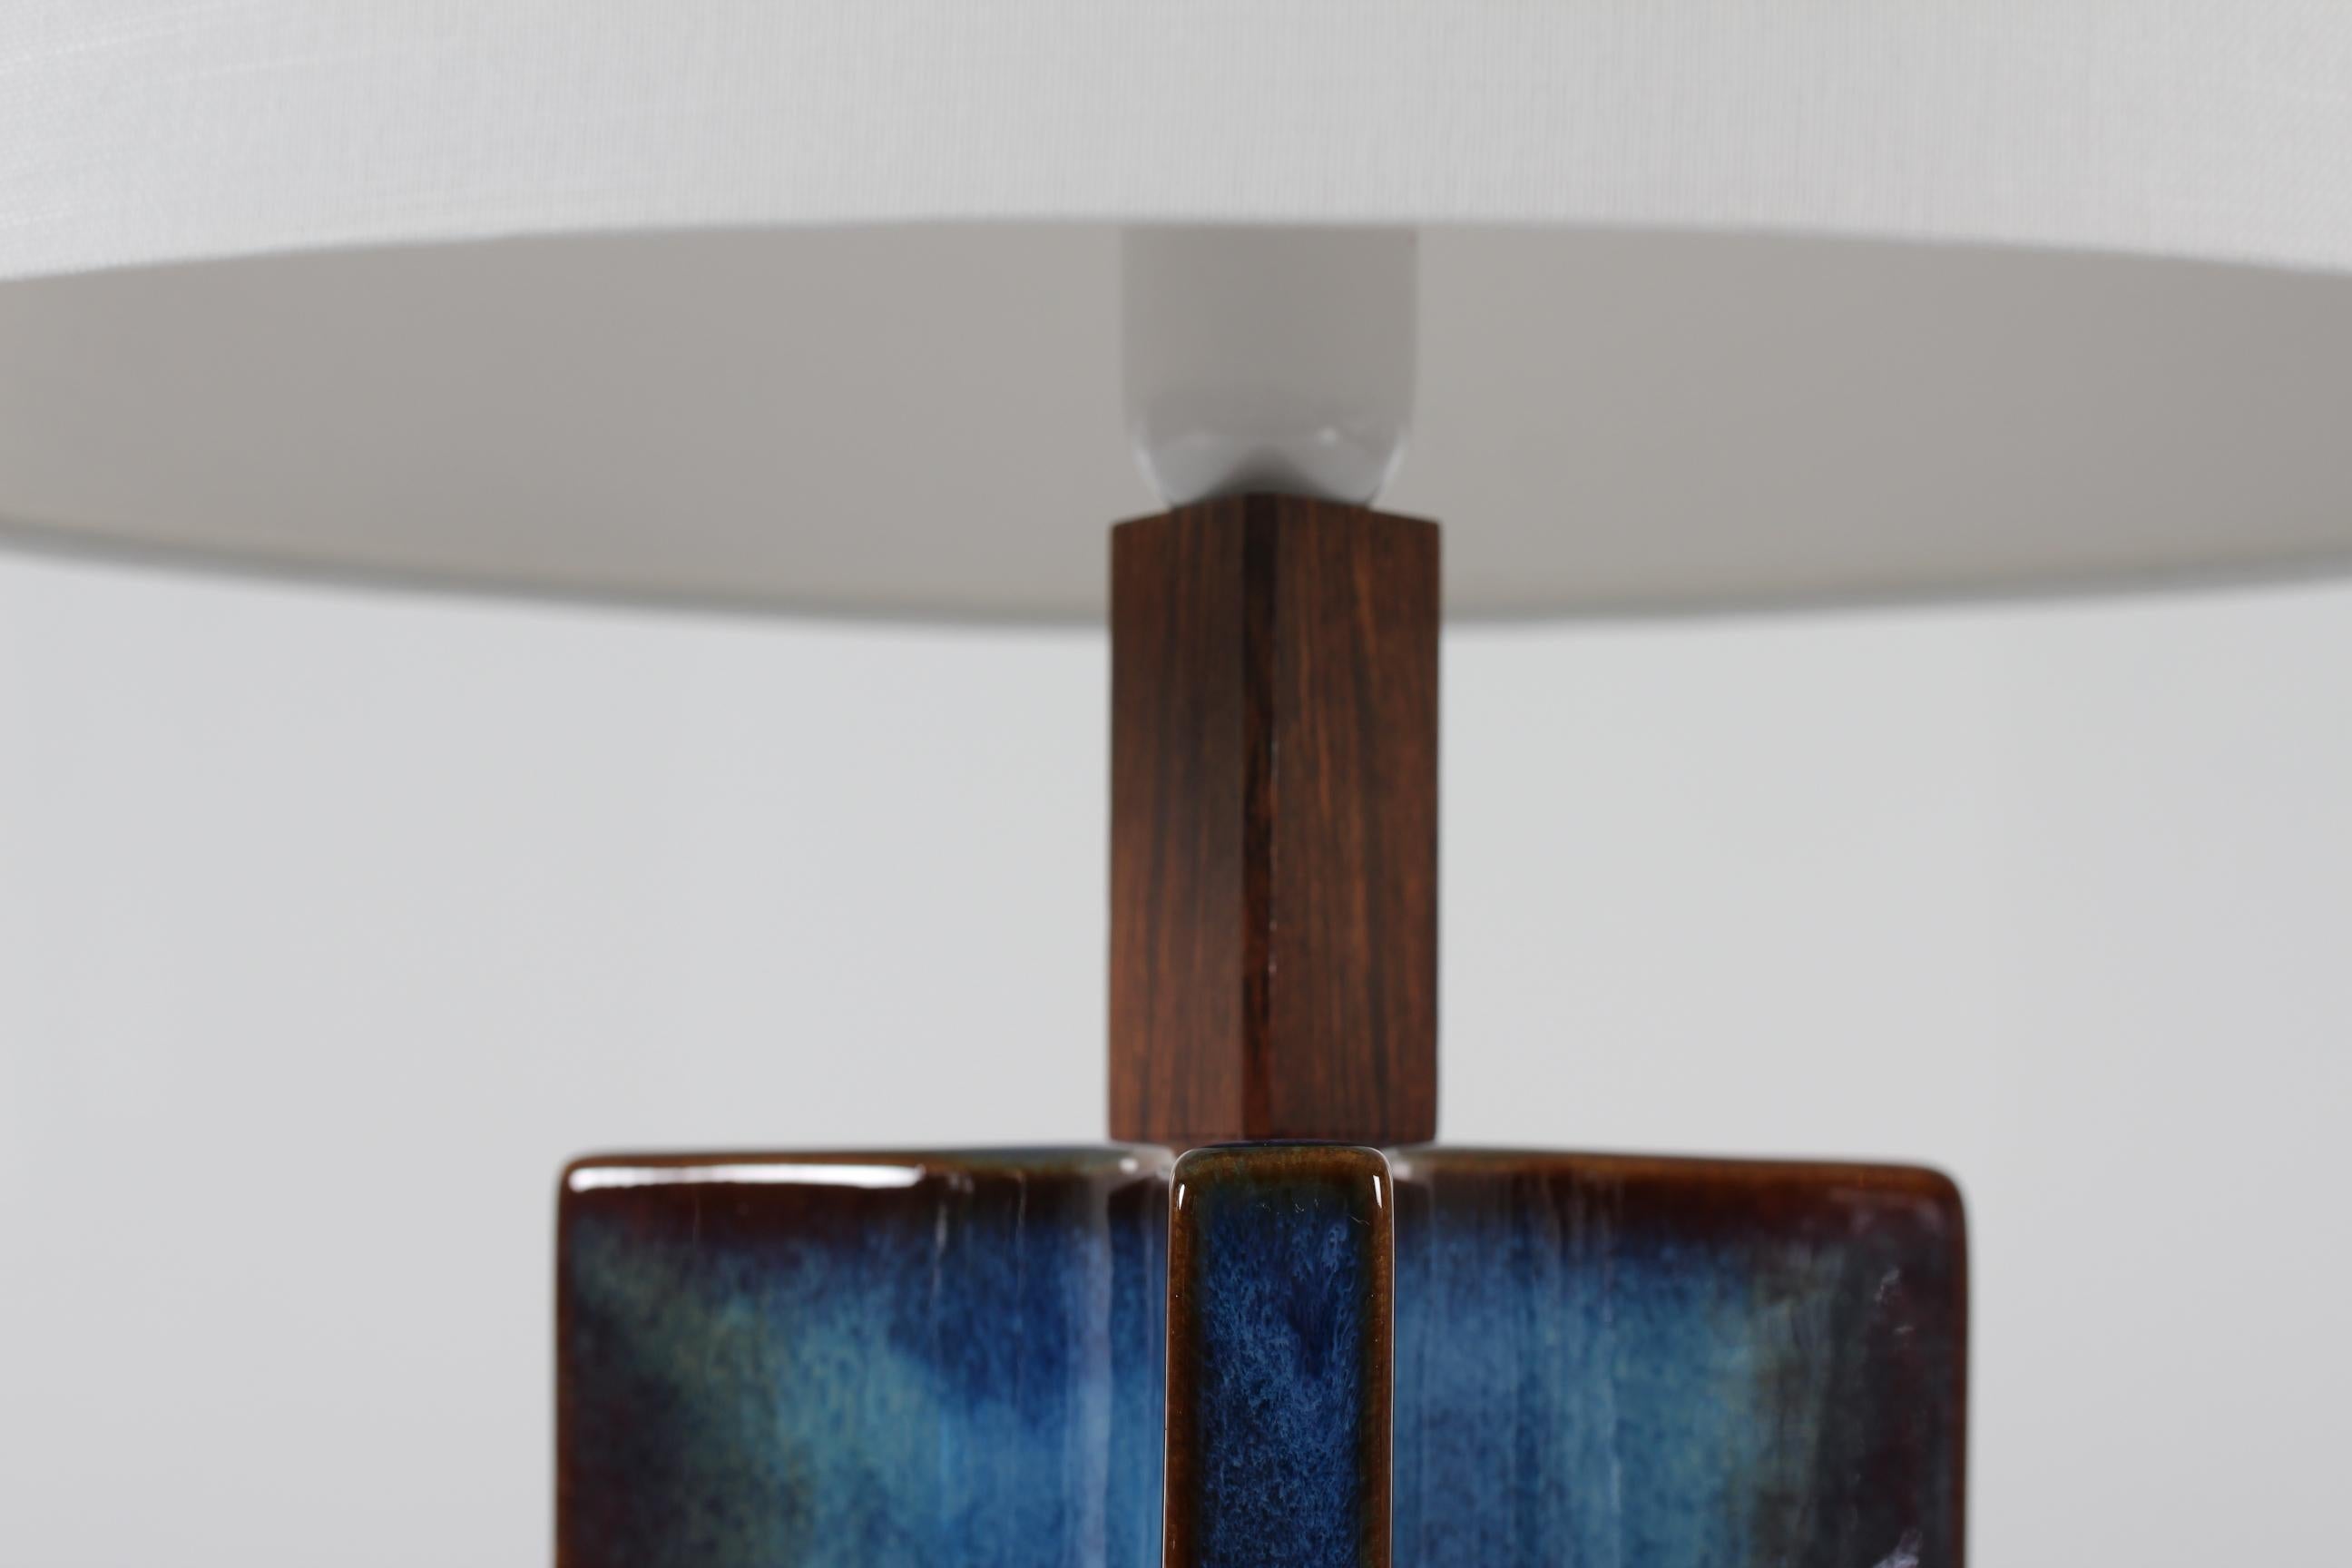 Tall and are sculptural table lamp from Søholm Stentøj, Denmark, circa 1960s.
The lamp has glaze with a beautiful color play in almost blue notes.

Included is a new lamp shade designed and made in Denmark. It's made of woven fabric with some